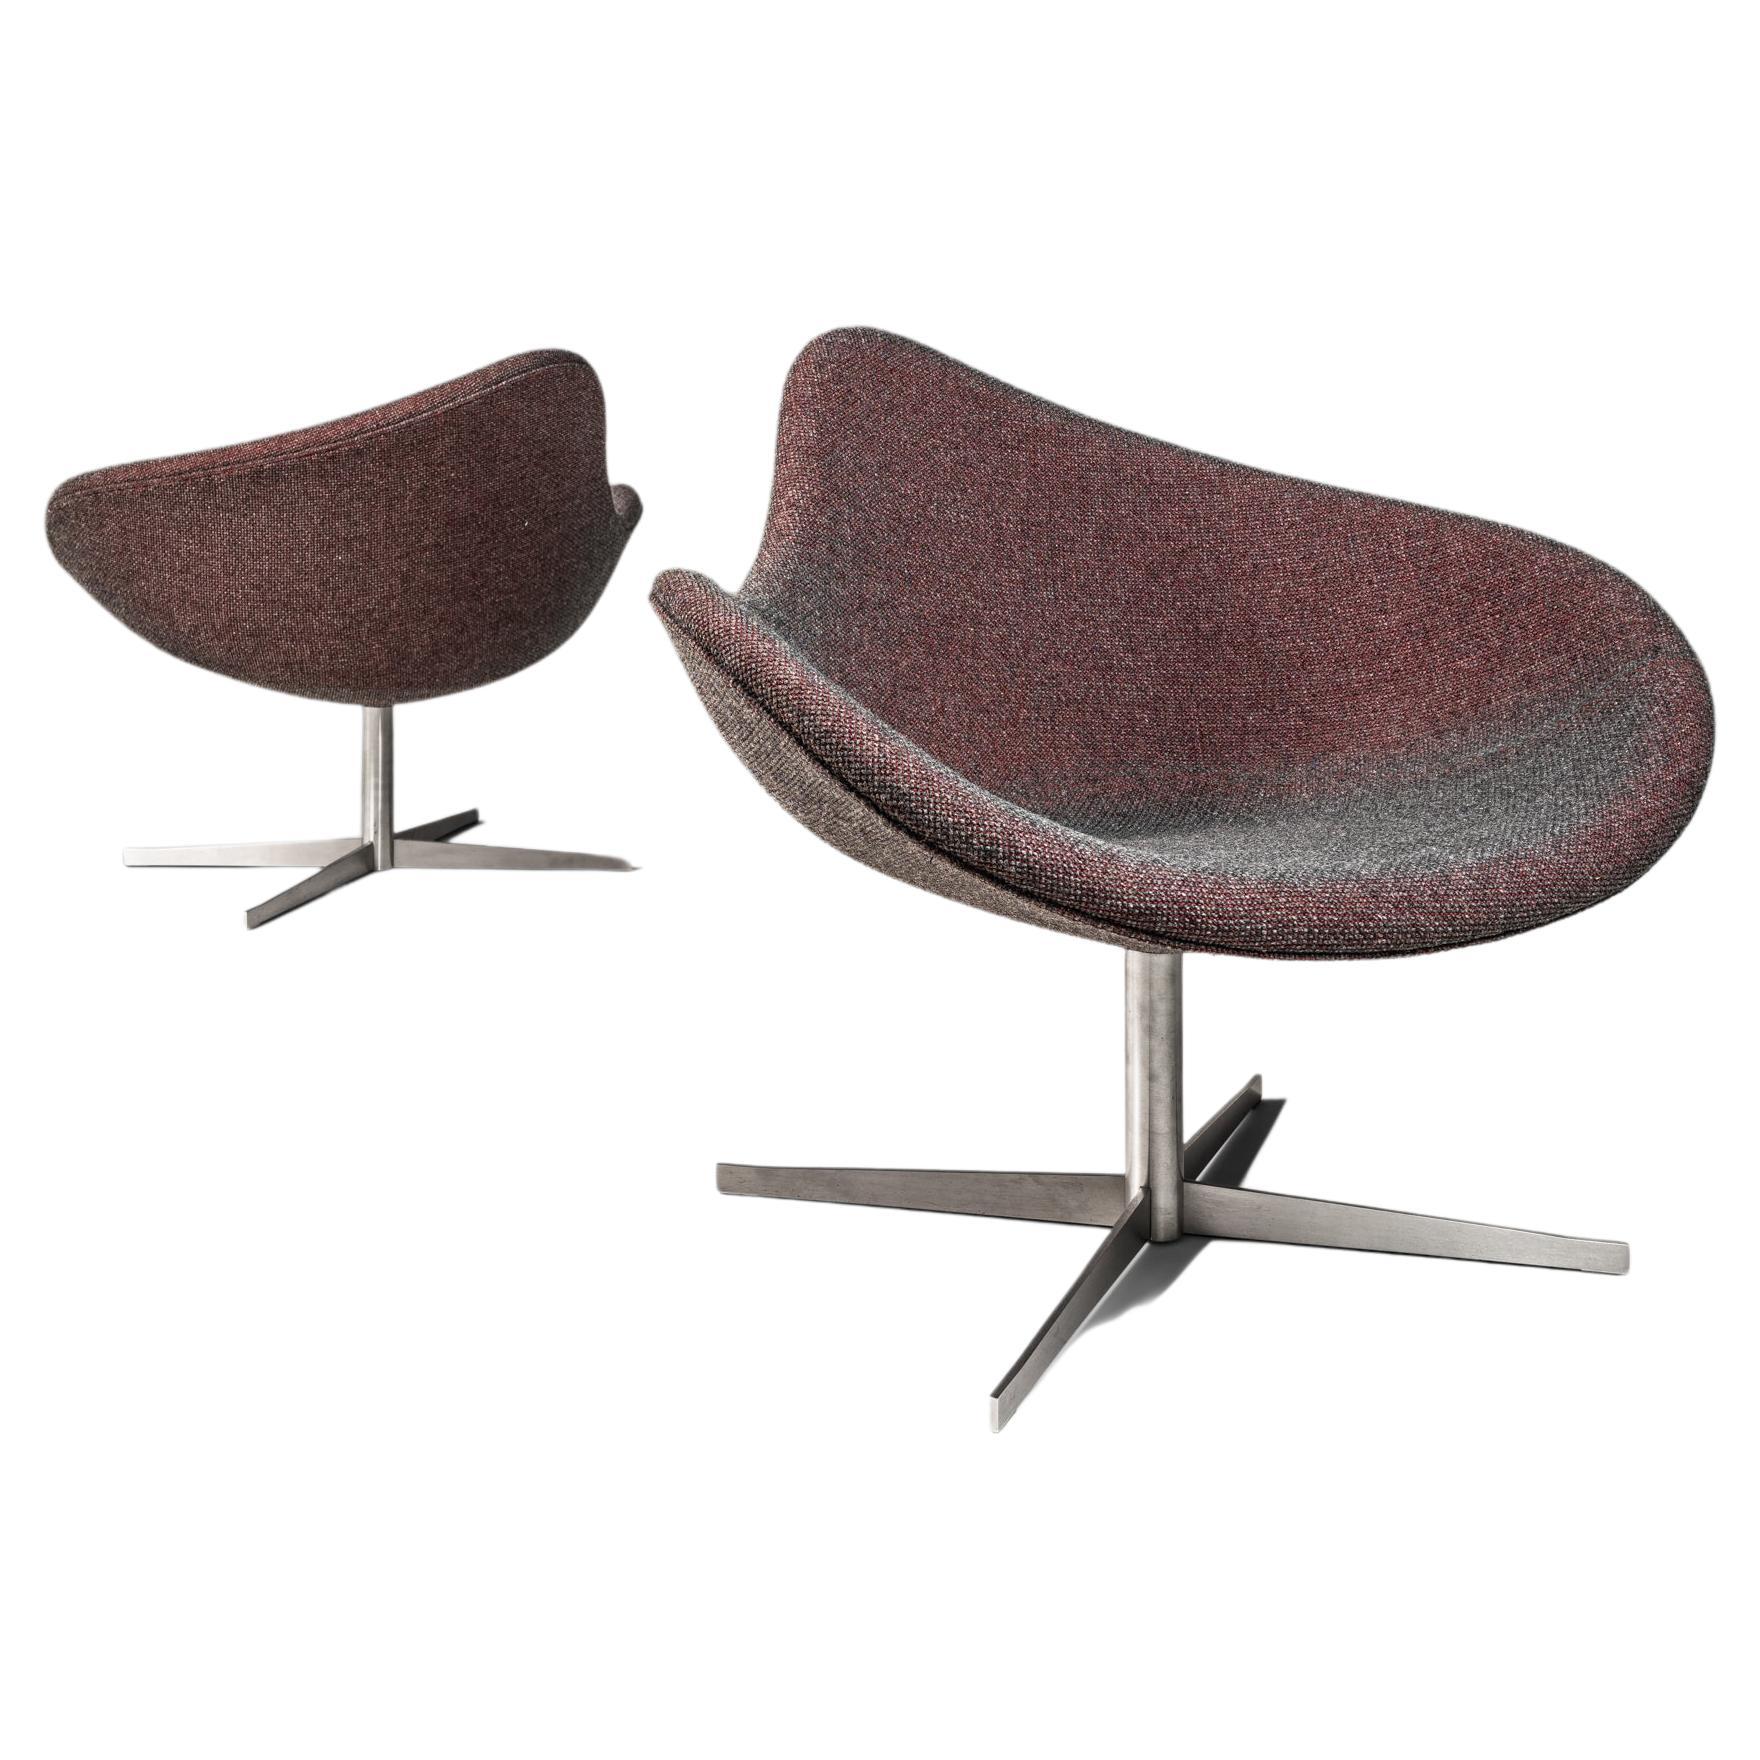 Set of Two Postmodern Swivel-Base "K2" Chairs by Busk & Hertzog, USA, c. 2000's